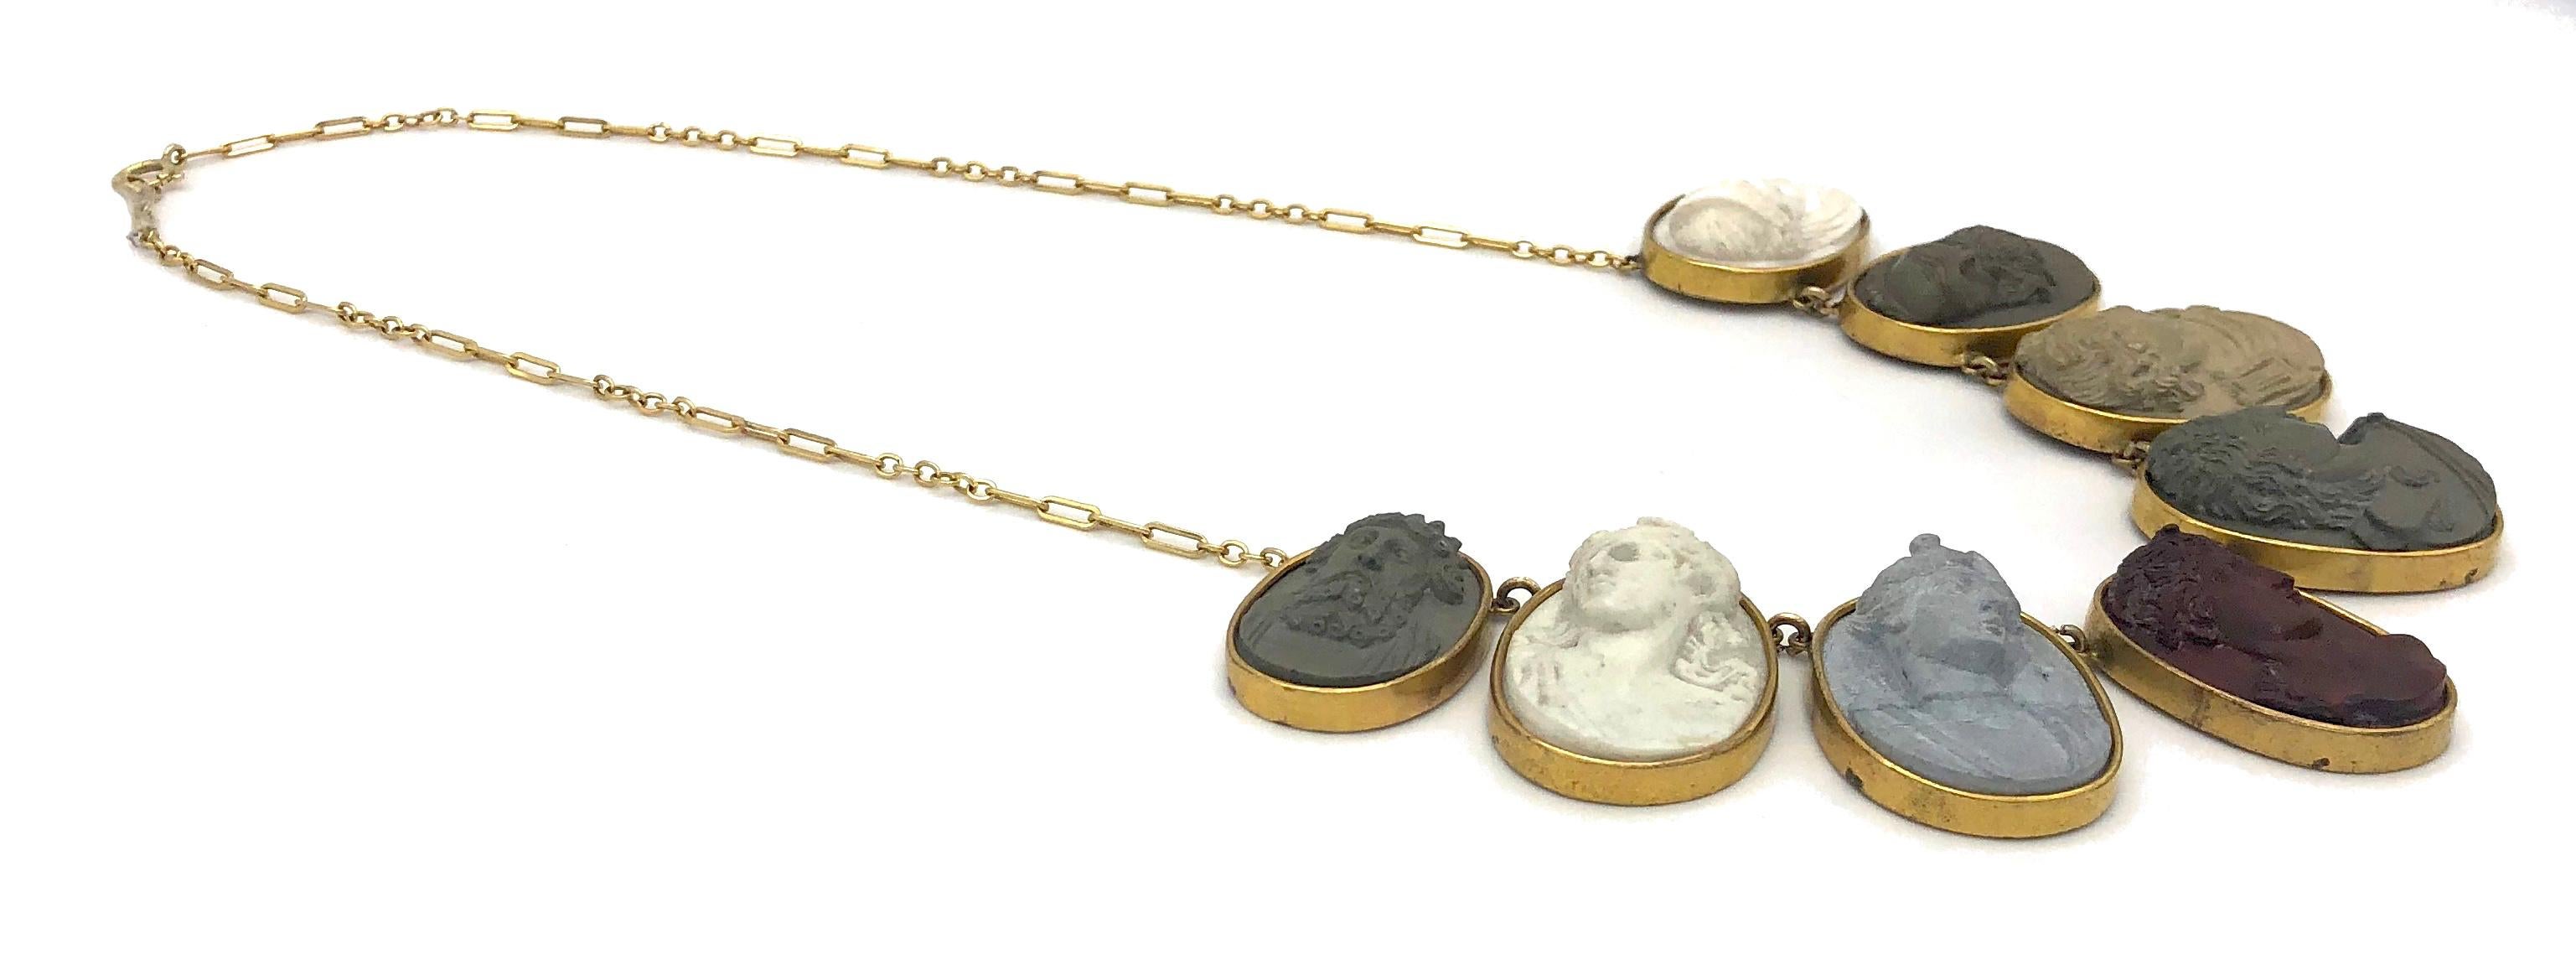 These seven wonderful, particularily large early 19th century oval lava cameos, measuring from 3,5cm x2,6cm to 2,2cm x 3 cm, are  mounted in gilt metal. They have been assembled to make up this magnificent necklace. The later goldchain dates from